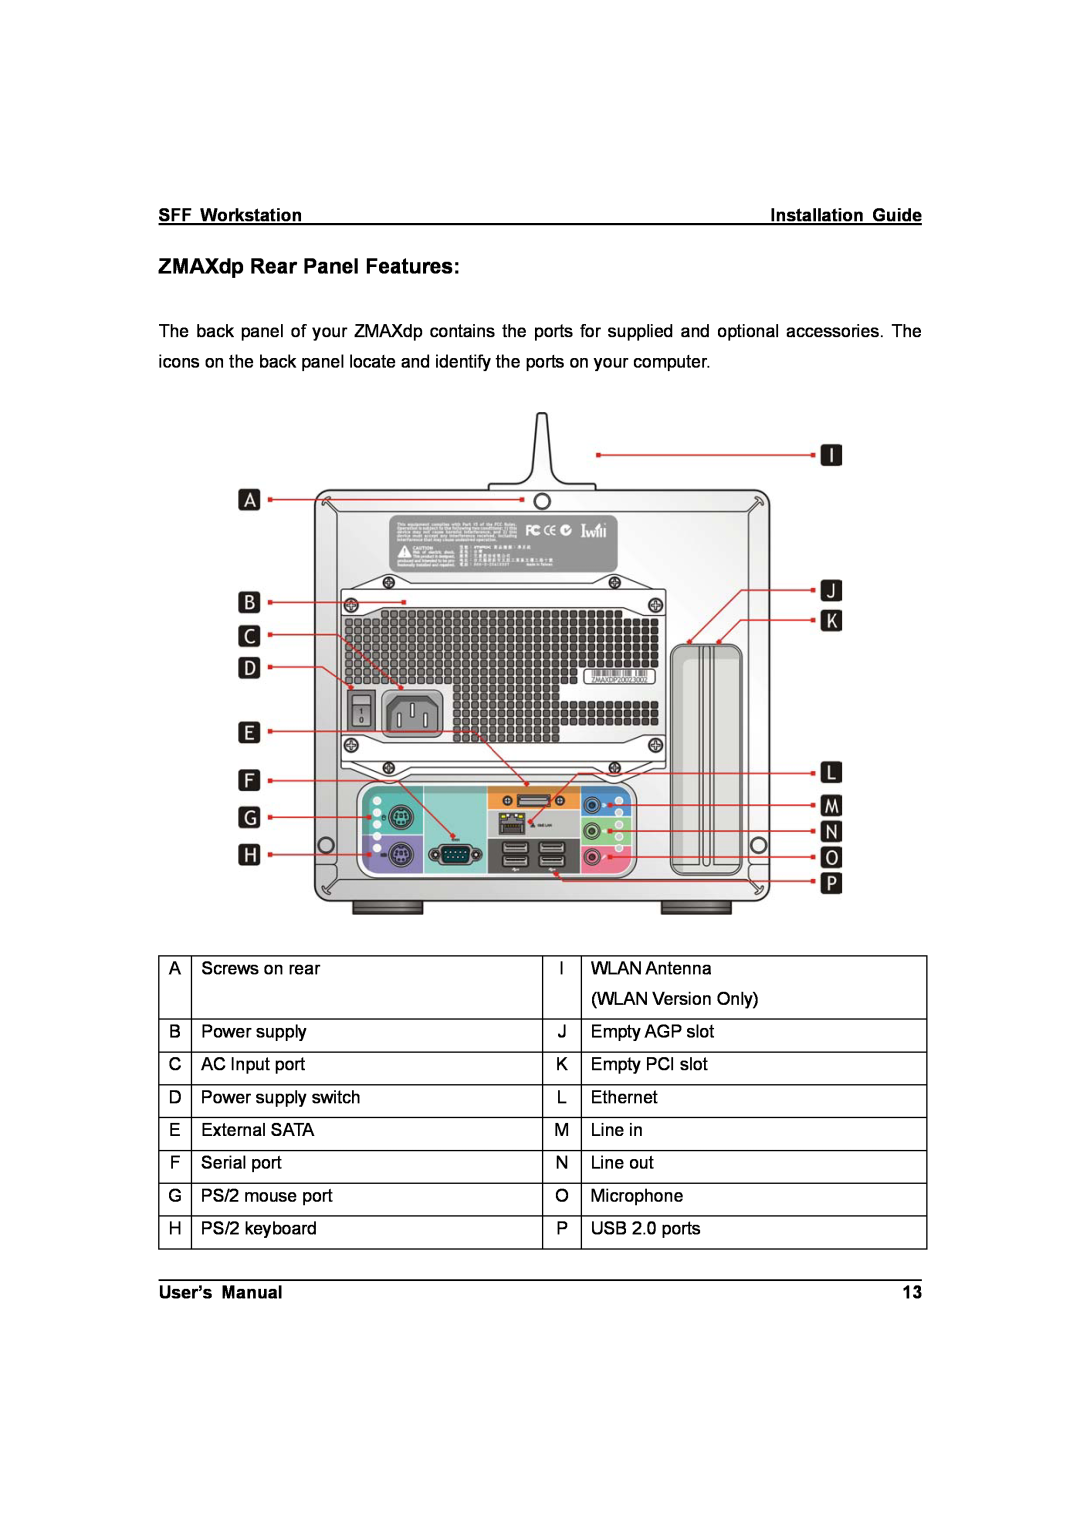 IBM user manual ZMAXdp Rear Panel Features, SFF Workstation, User’s Manual 